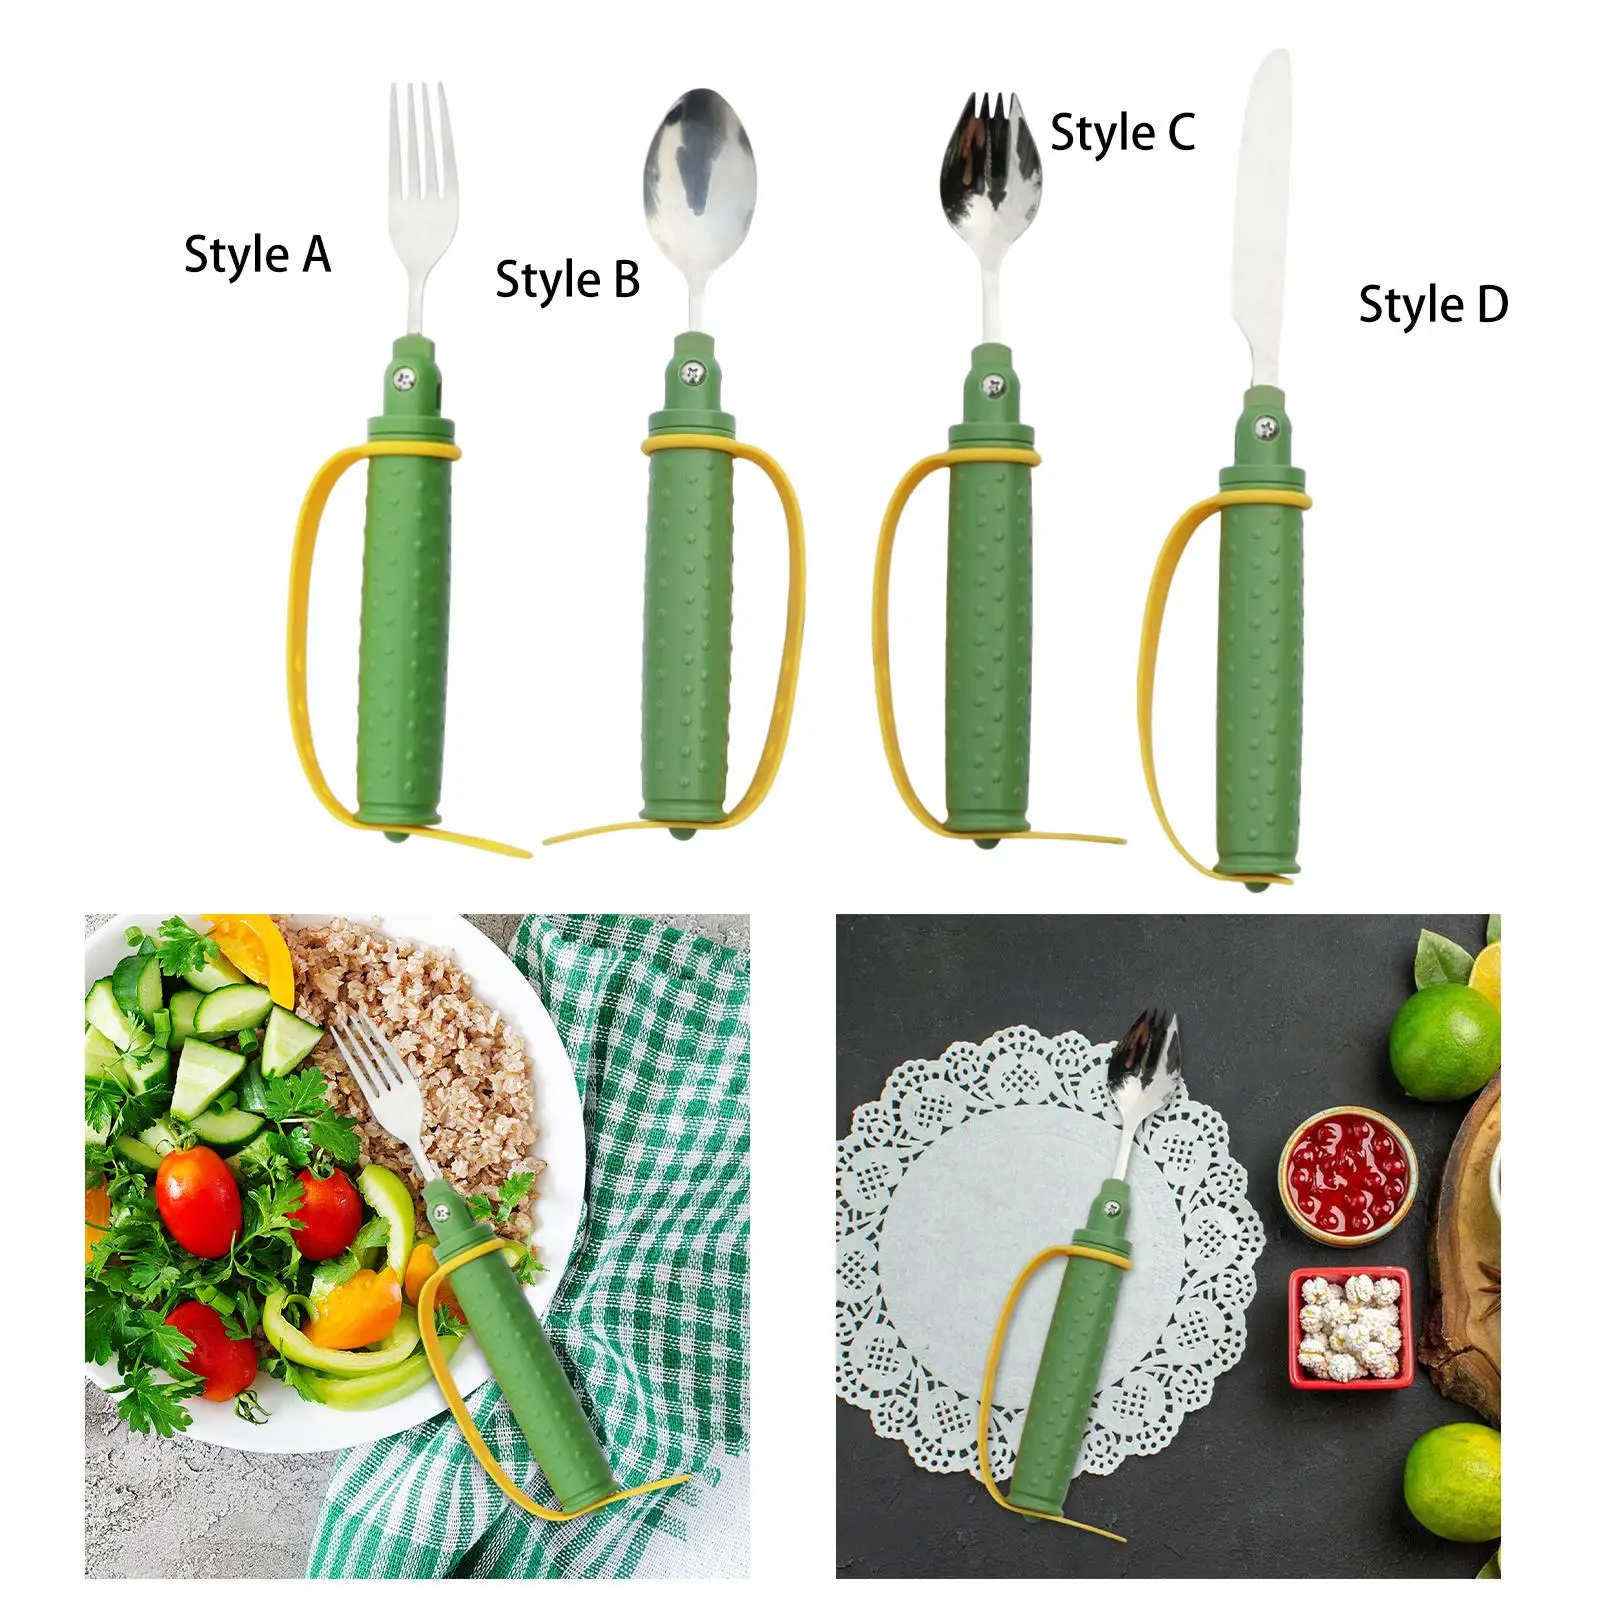 Easy Grip Spoon Fork with Silicone Holder Universal Anti Slip Anti shaking Stainless Steel Caring Utensils for Eating Elderly